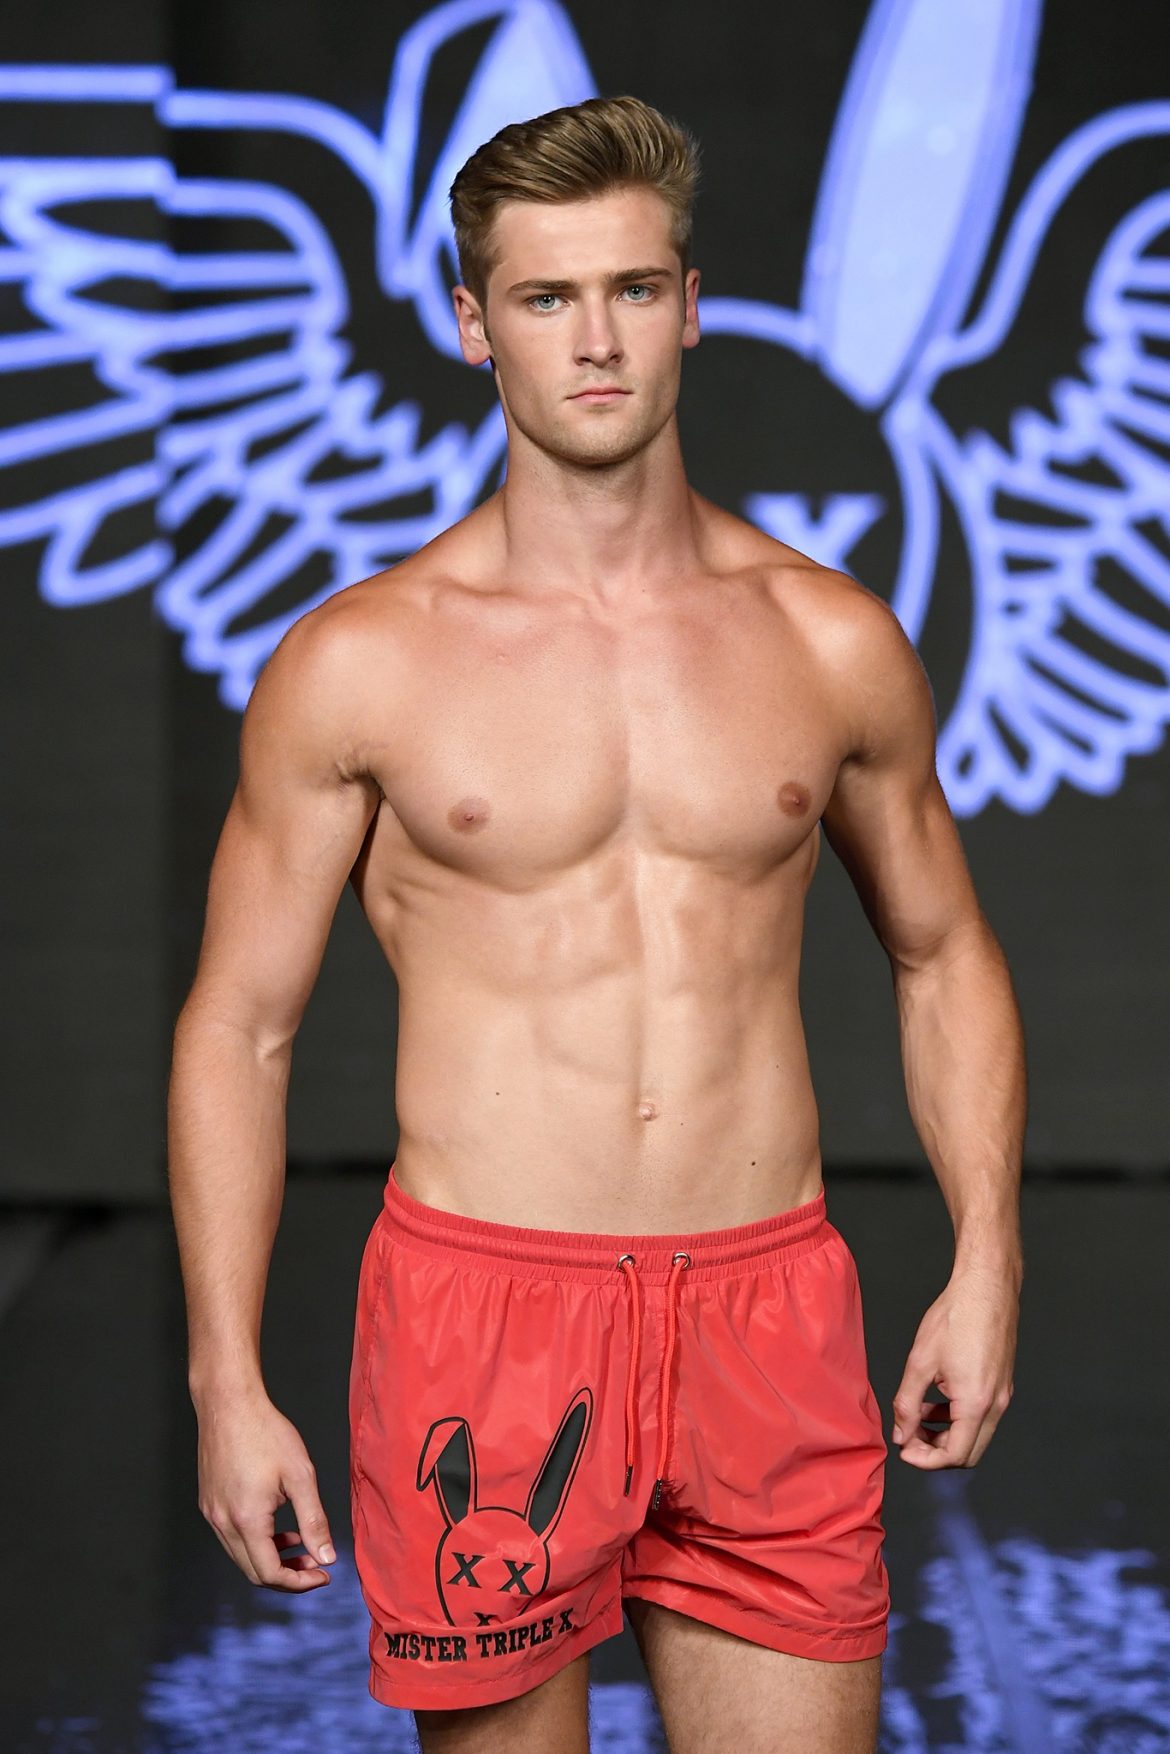 Miami Swim Week: It’s the Sexiest Fashion Event this 2019 - Pinoy Guy Guide